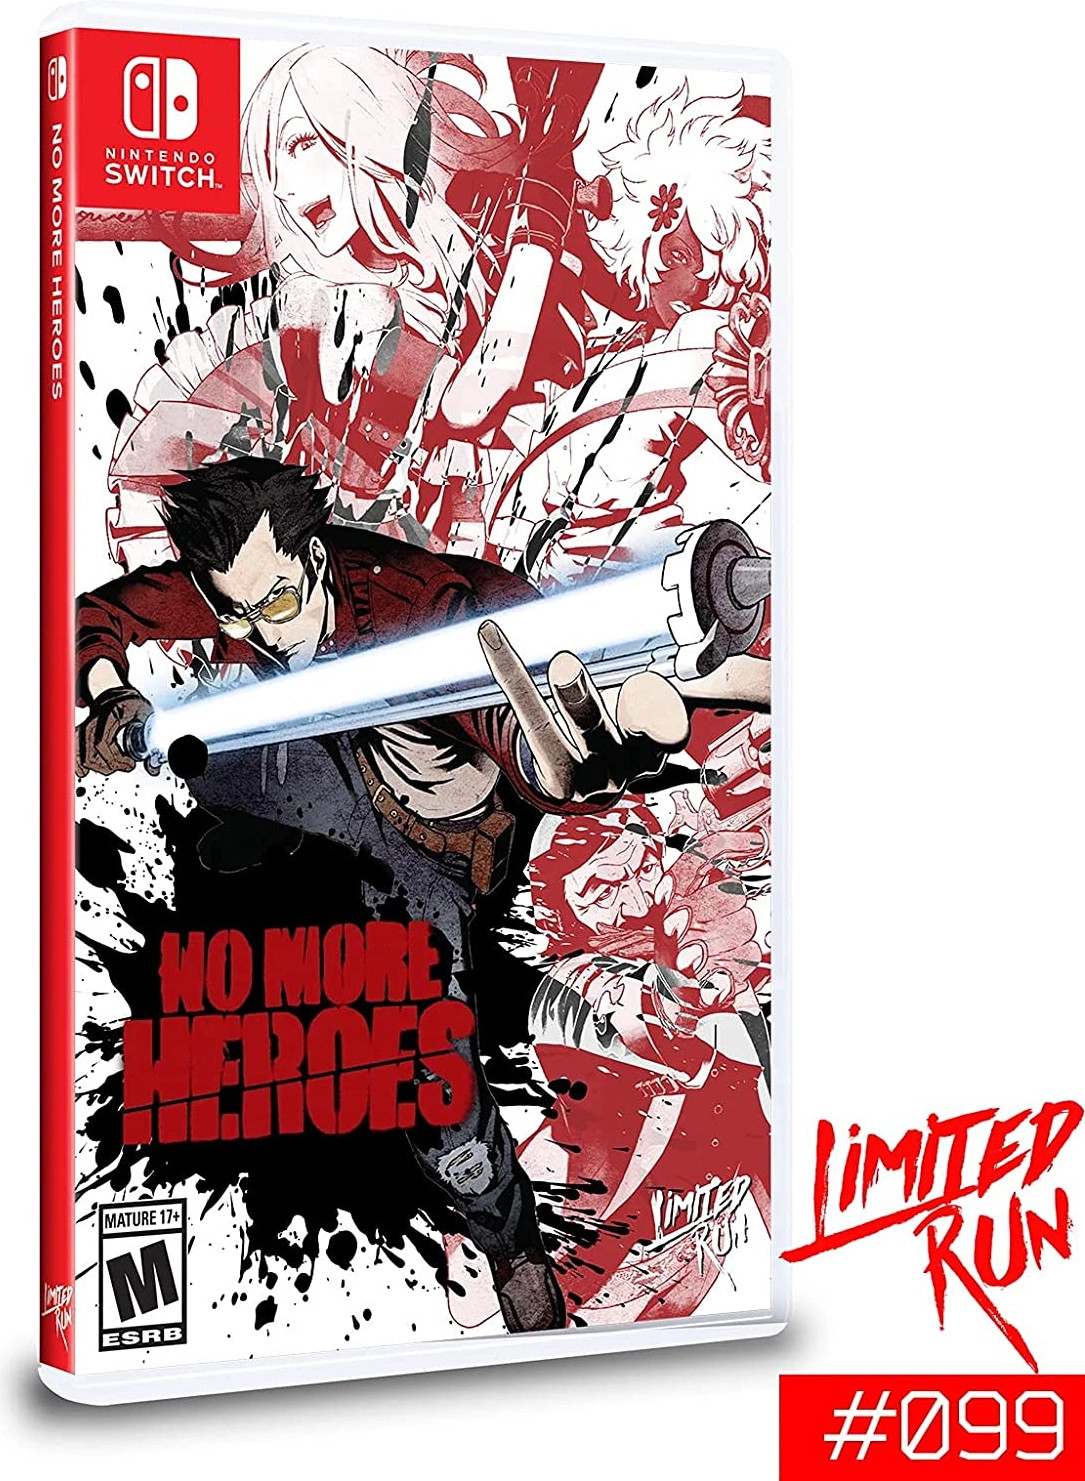 No More Heroes (Limited Run Games) - Nintendo Switch